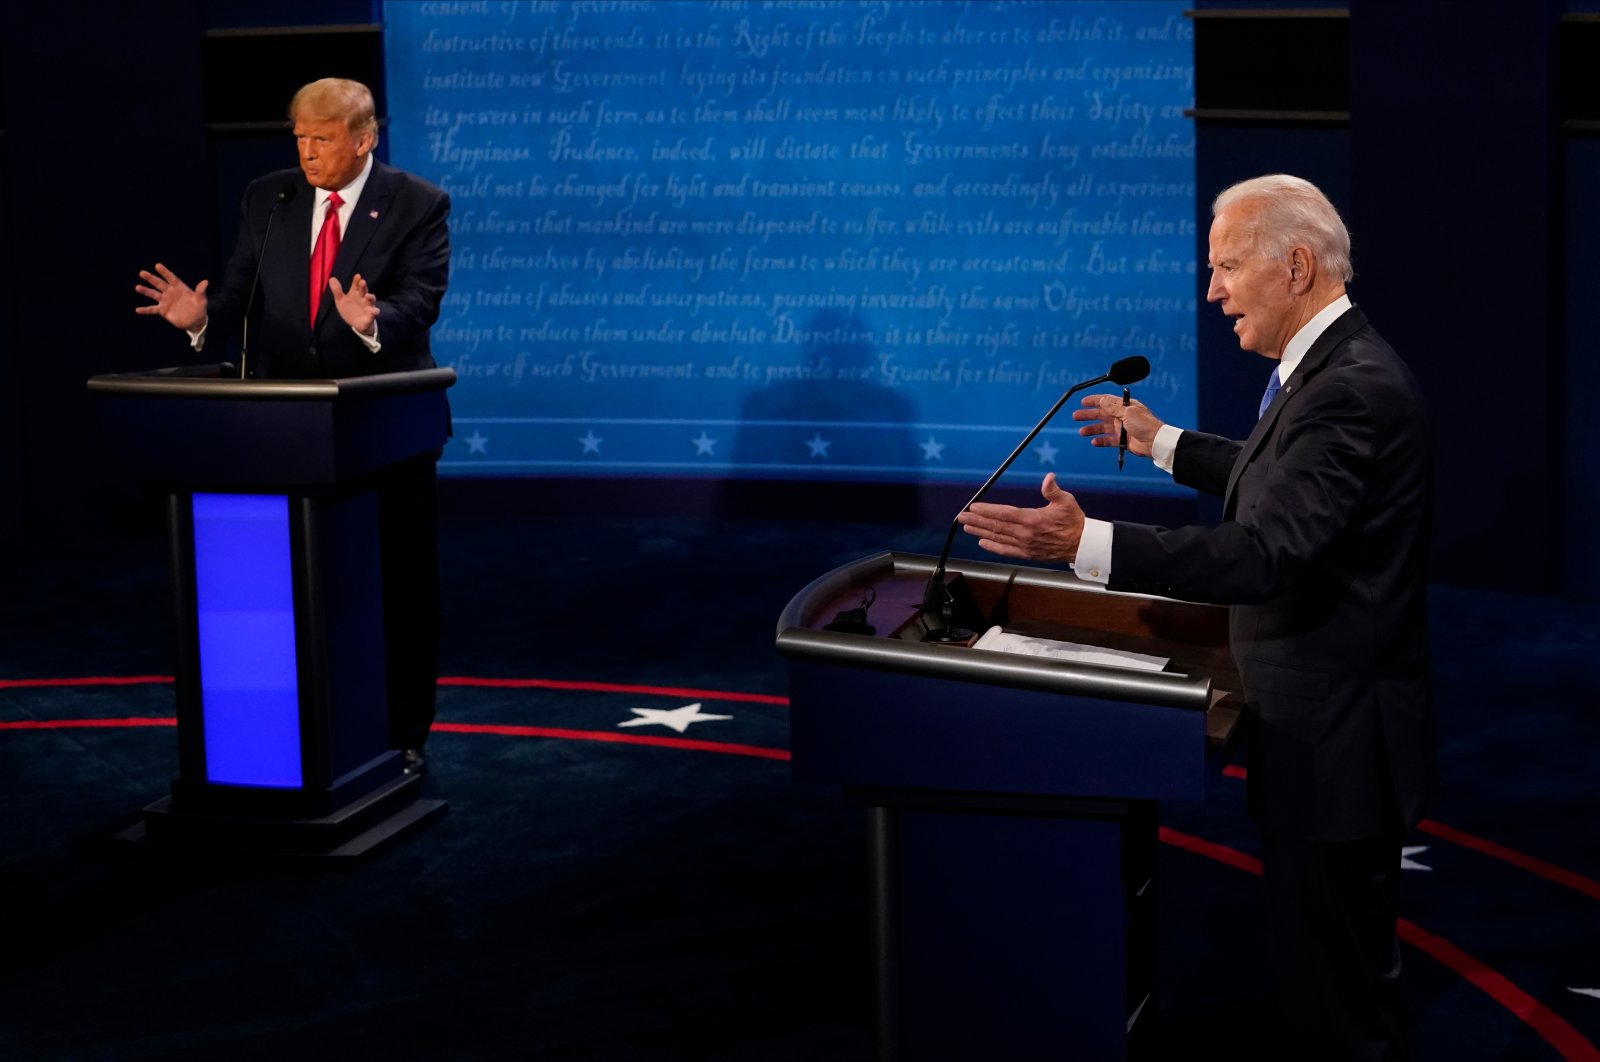 U.S. President Donald Trump (L) and Democratic presidential candidate Joe Biden during a presidential debate at Case Western Reserve University in Cleveland, Ohio, Sept. 29, 2020. (AA Photo)